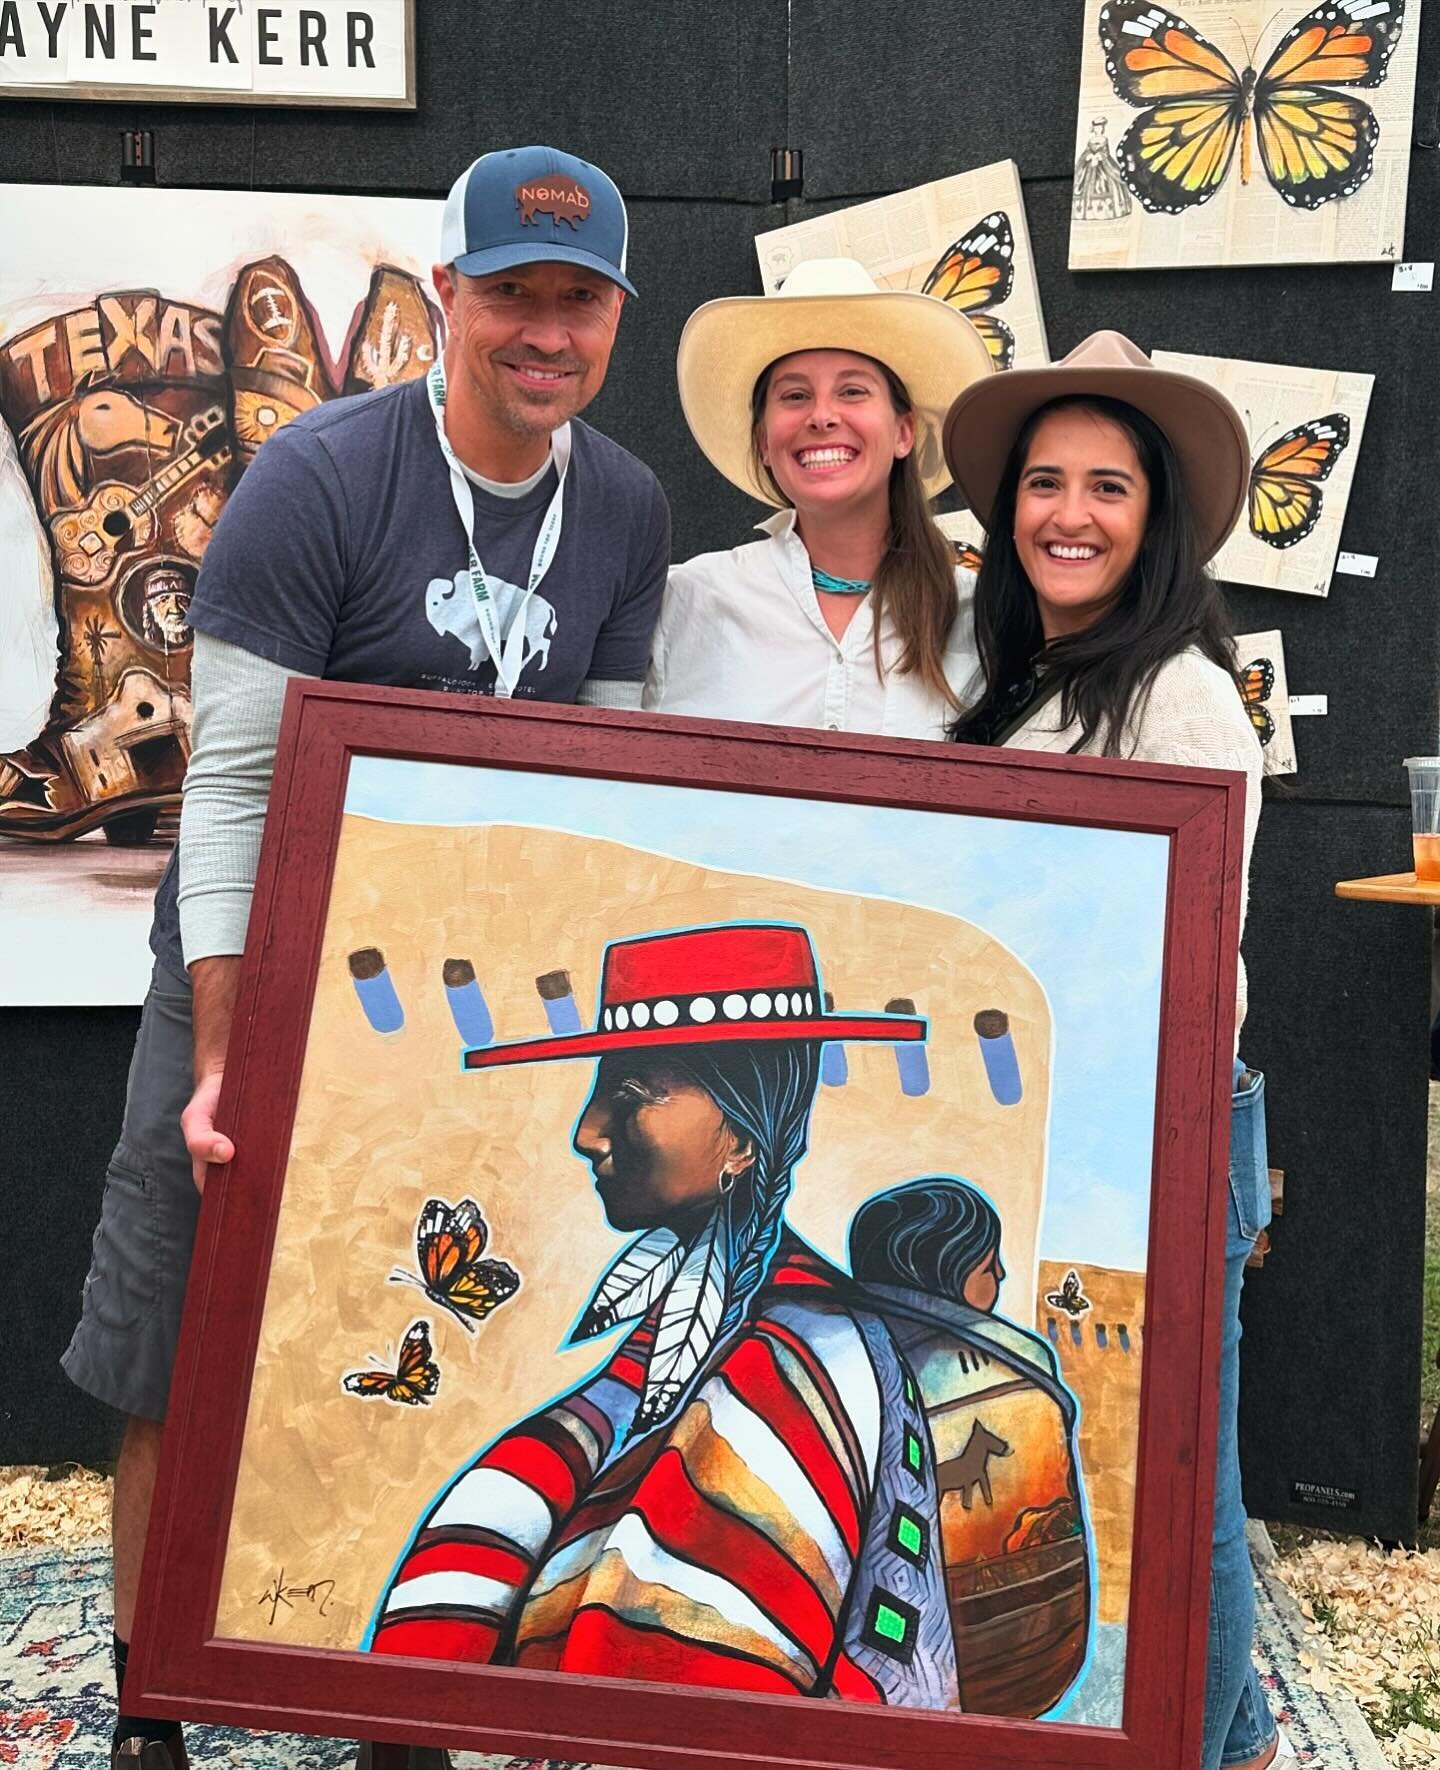 &ldquo;New Beginnings&rdquo; is getting a new home in Taos, Nm! 🙌🏼 

So very thankful for a great opening day at @marburgerfarm and for new friends. 🙏🏼

#southwesternart 
#taos
#nativeamerican 
#westernart
#artofthewest 
#newmexico